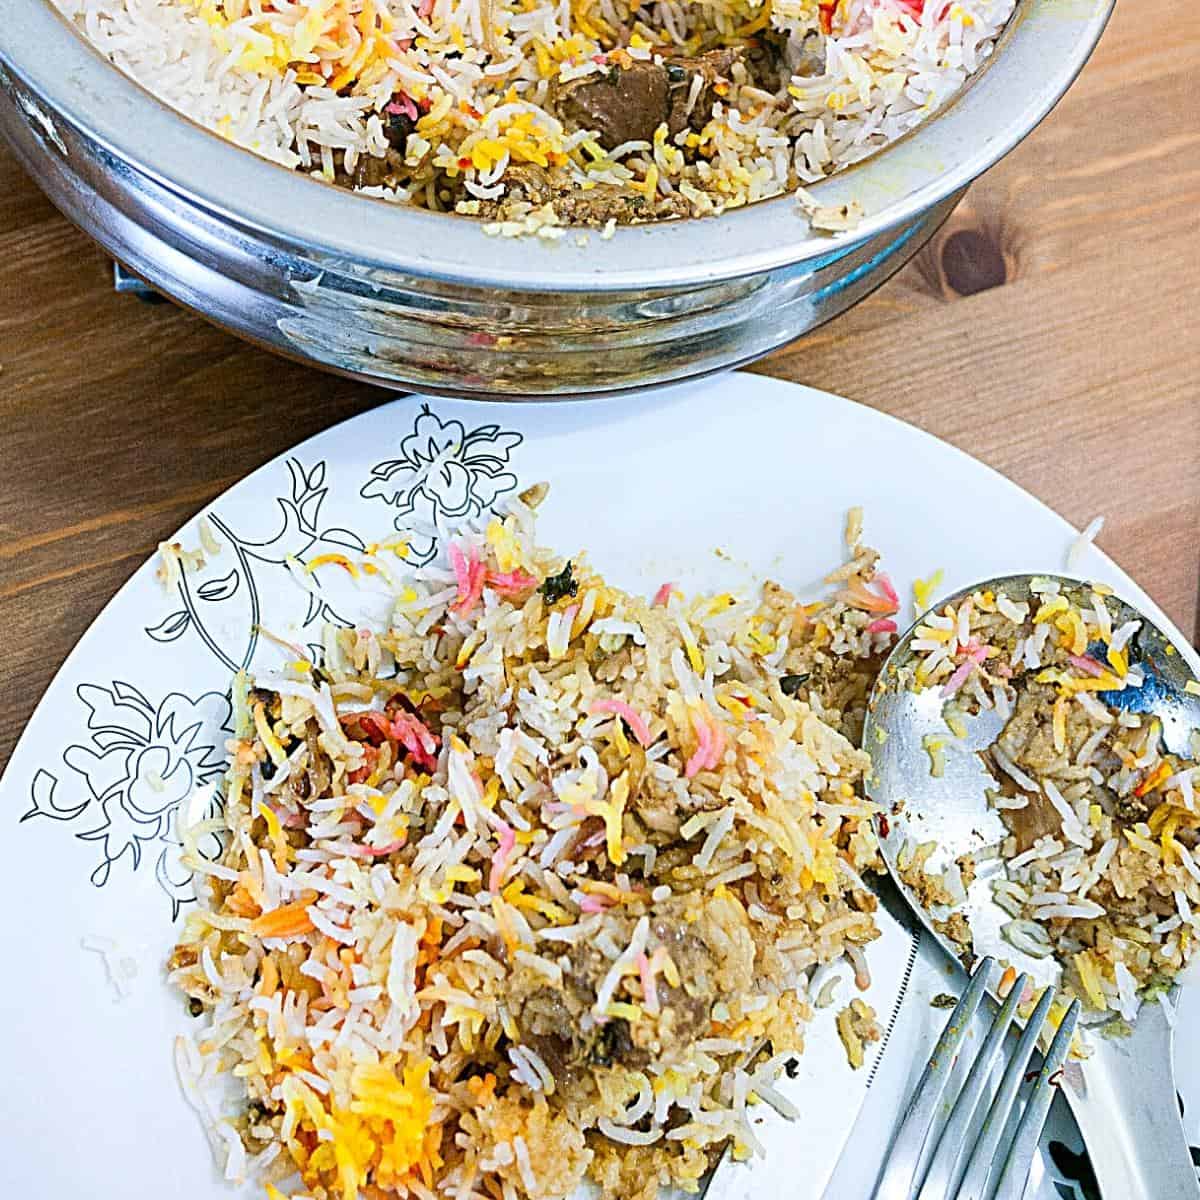 A plate with biryani and lamb cubes.